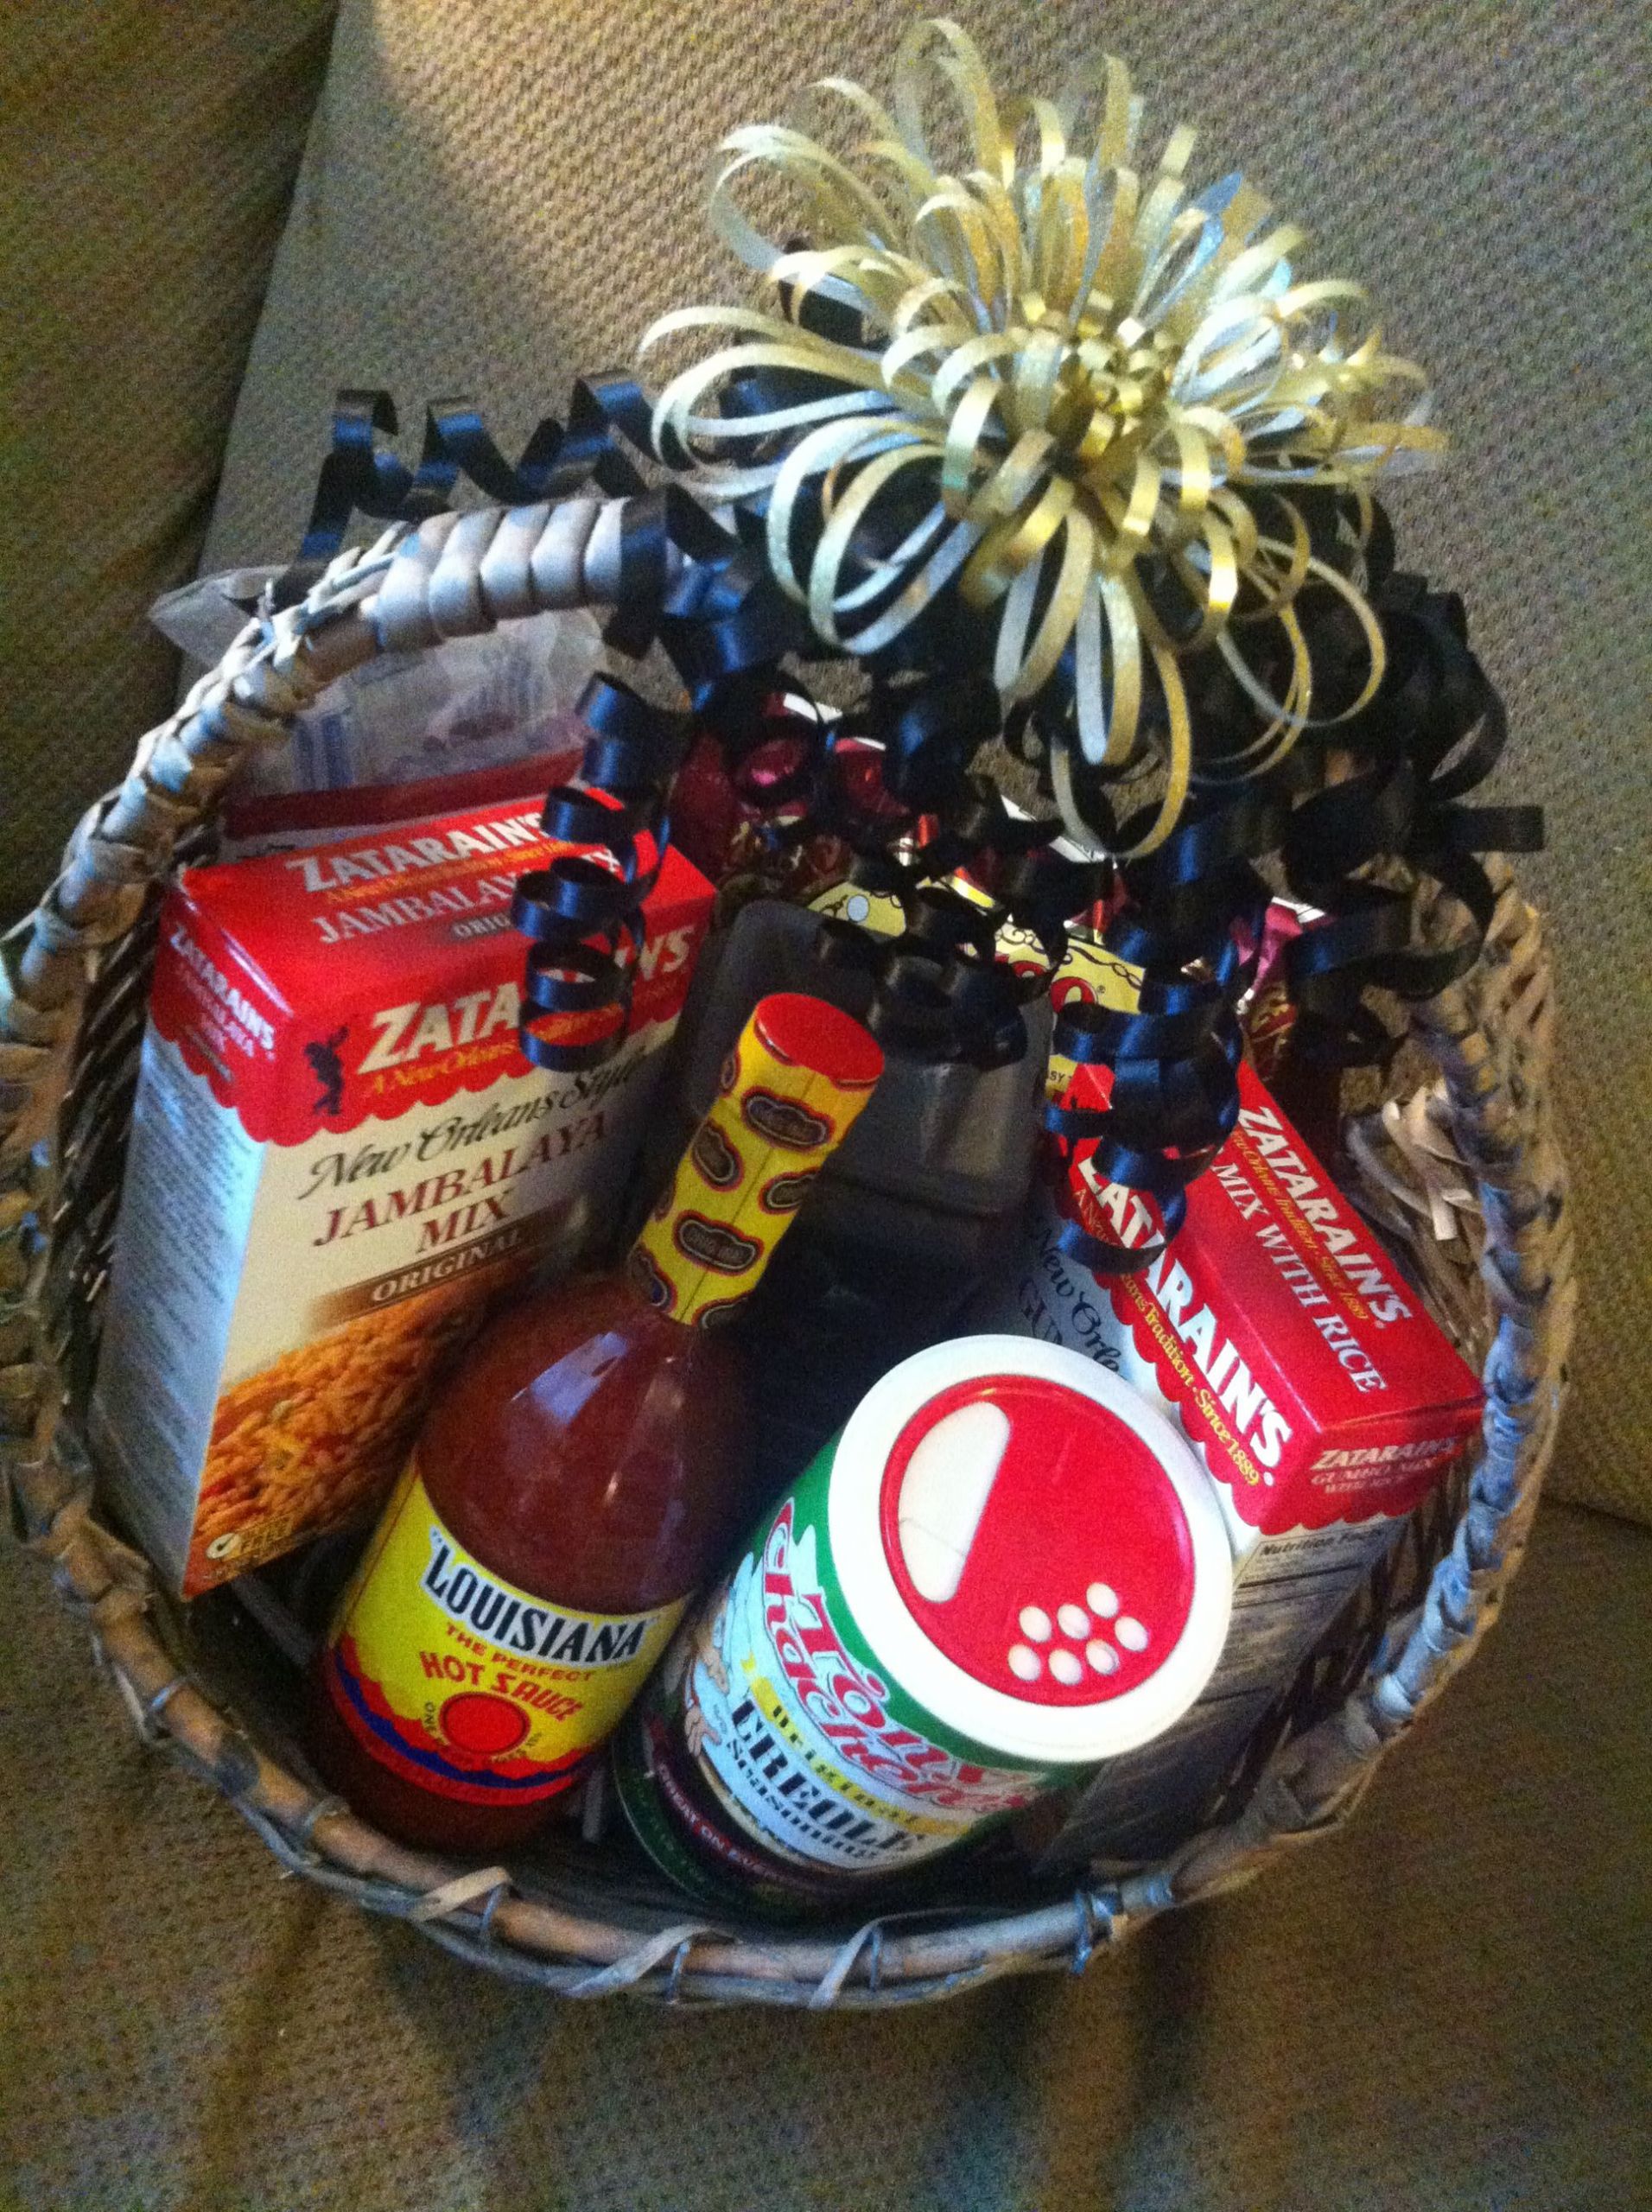 New Orleans Gift Basket Ideas
 New Orleans themed t basket Including Louisiana hot